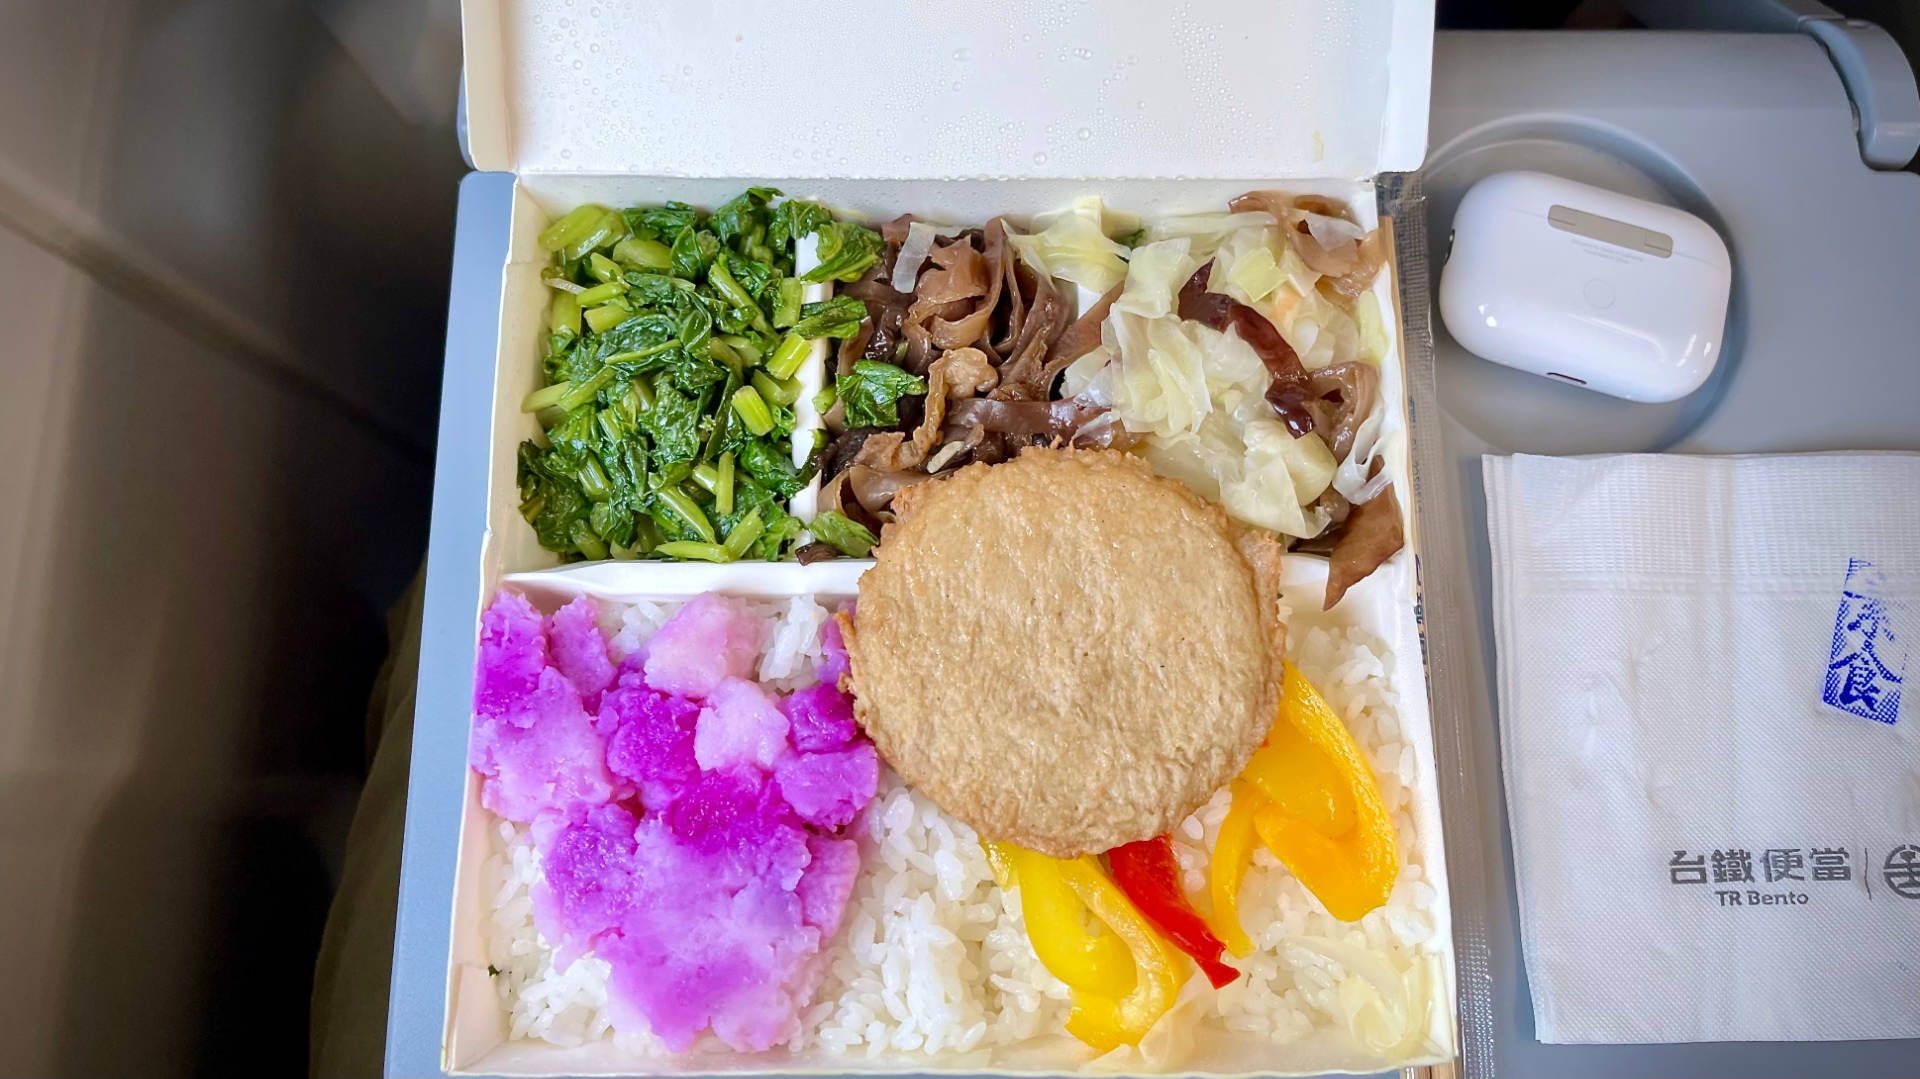 An open bento box containing white rice, a round tofu patty, and six types of vegetable.